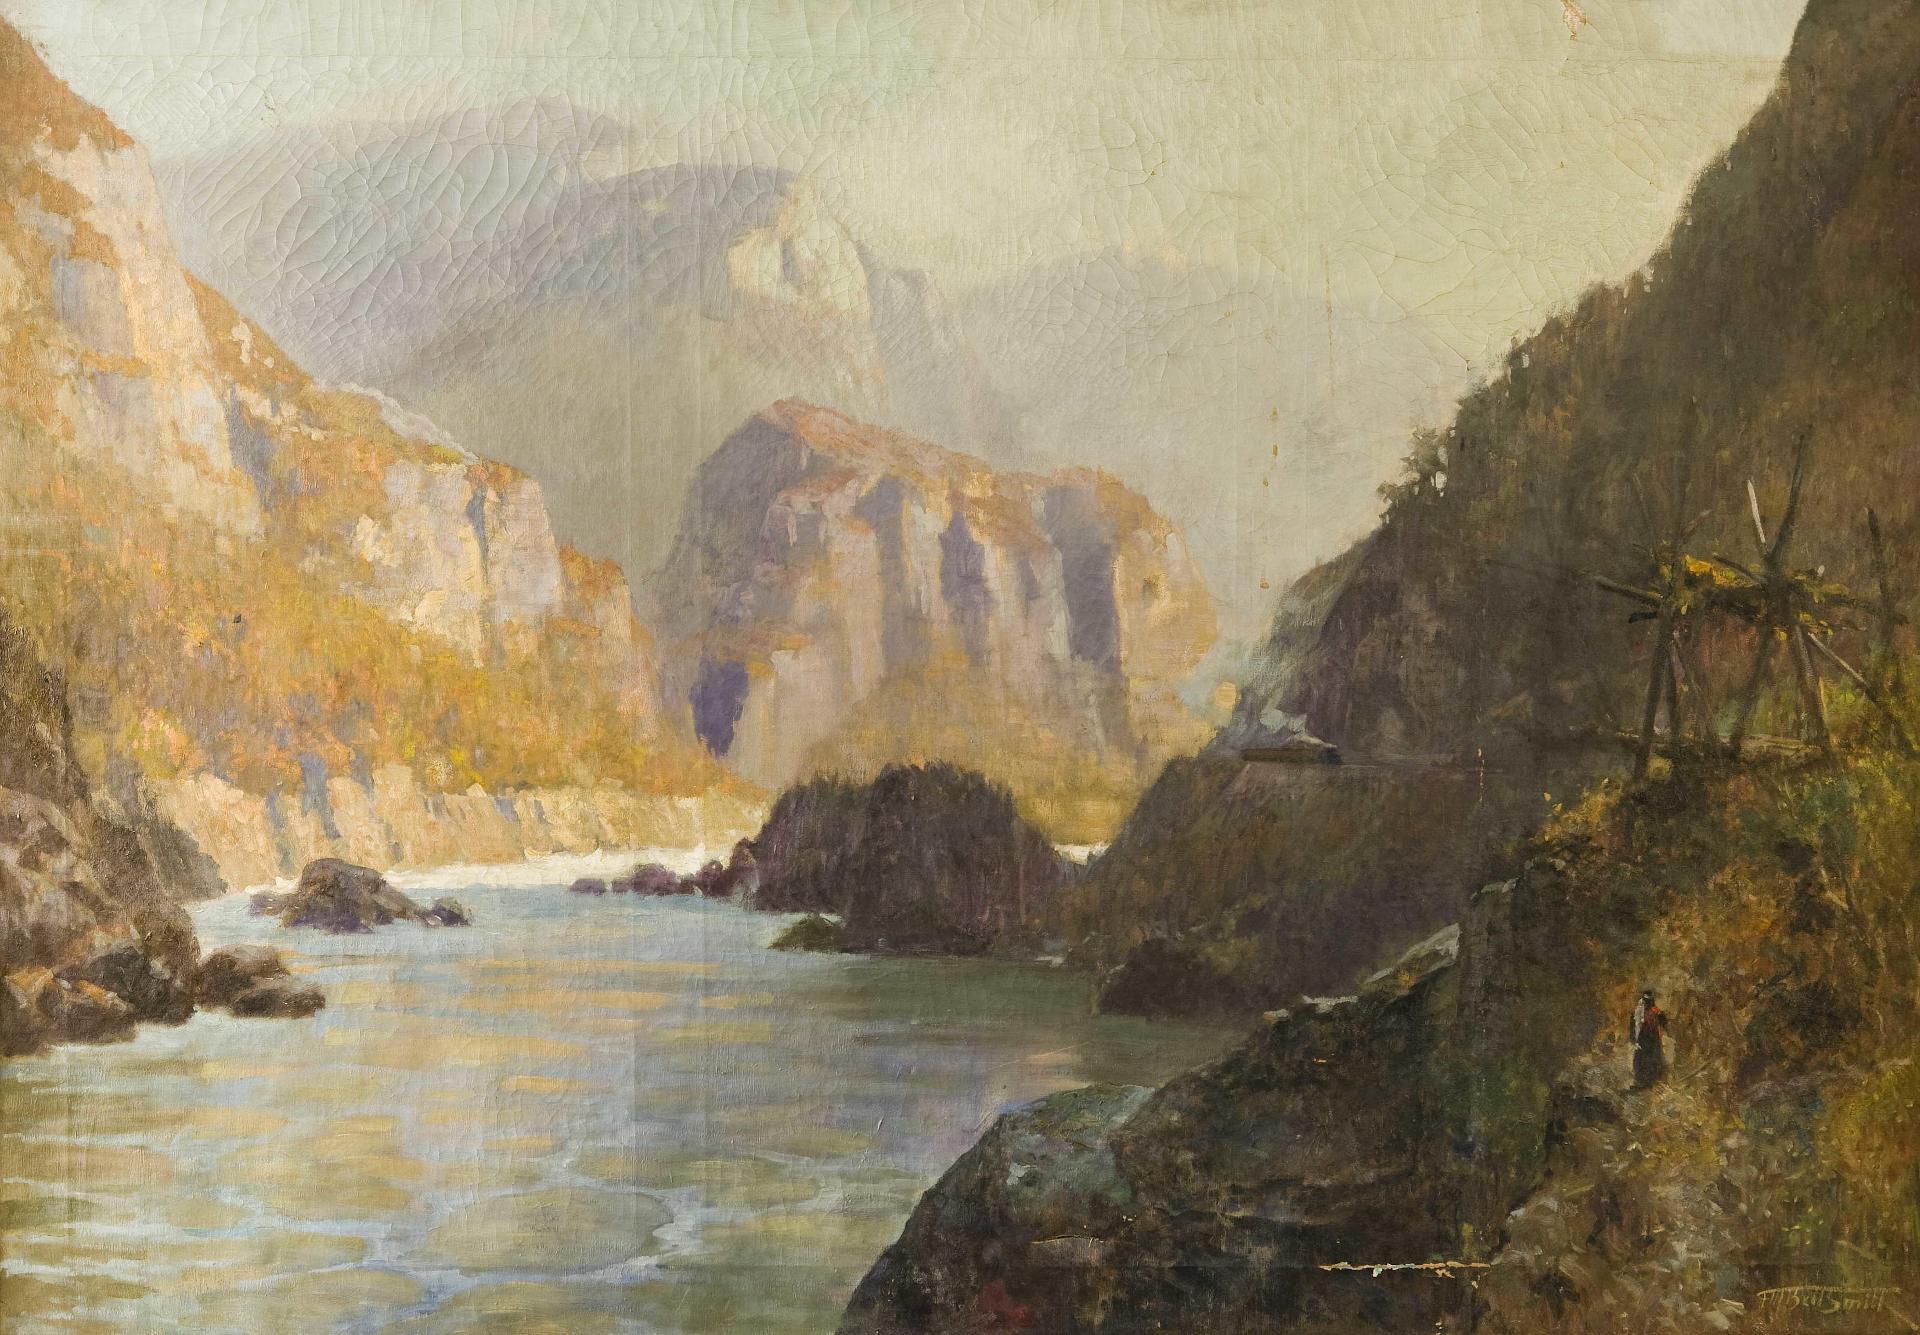 Frederic Martlett Bell-Smith (1846-1923) - Train passing through the Fraser Canyon near an Indian fishing place